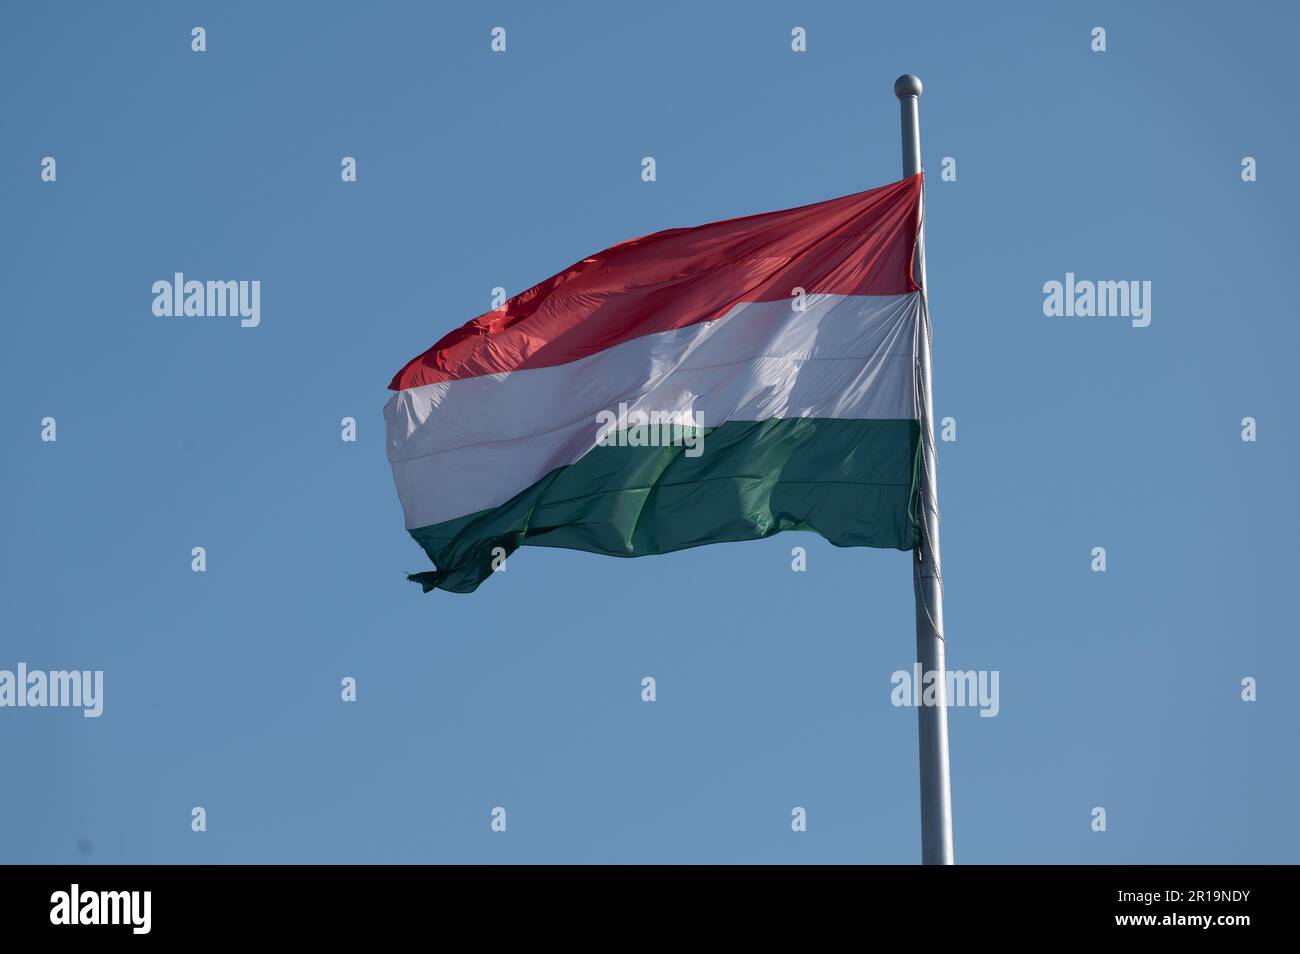 National flag of Hungary flying from a flagpole against a blue sky Stock Photo